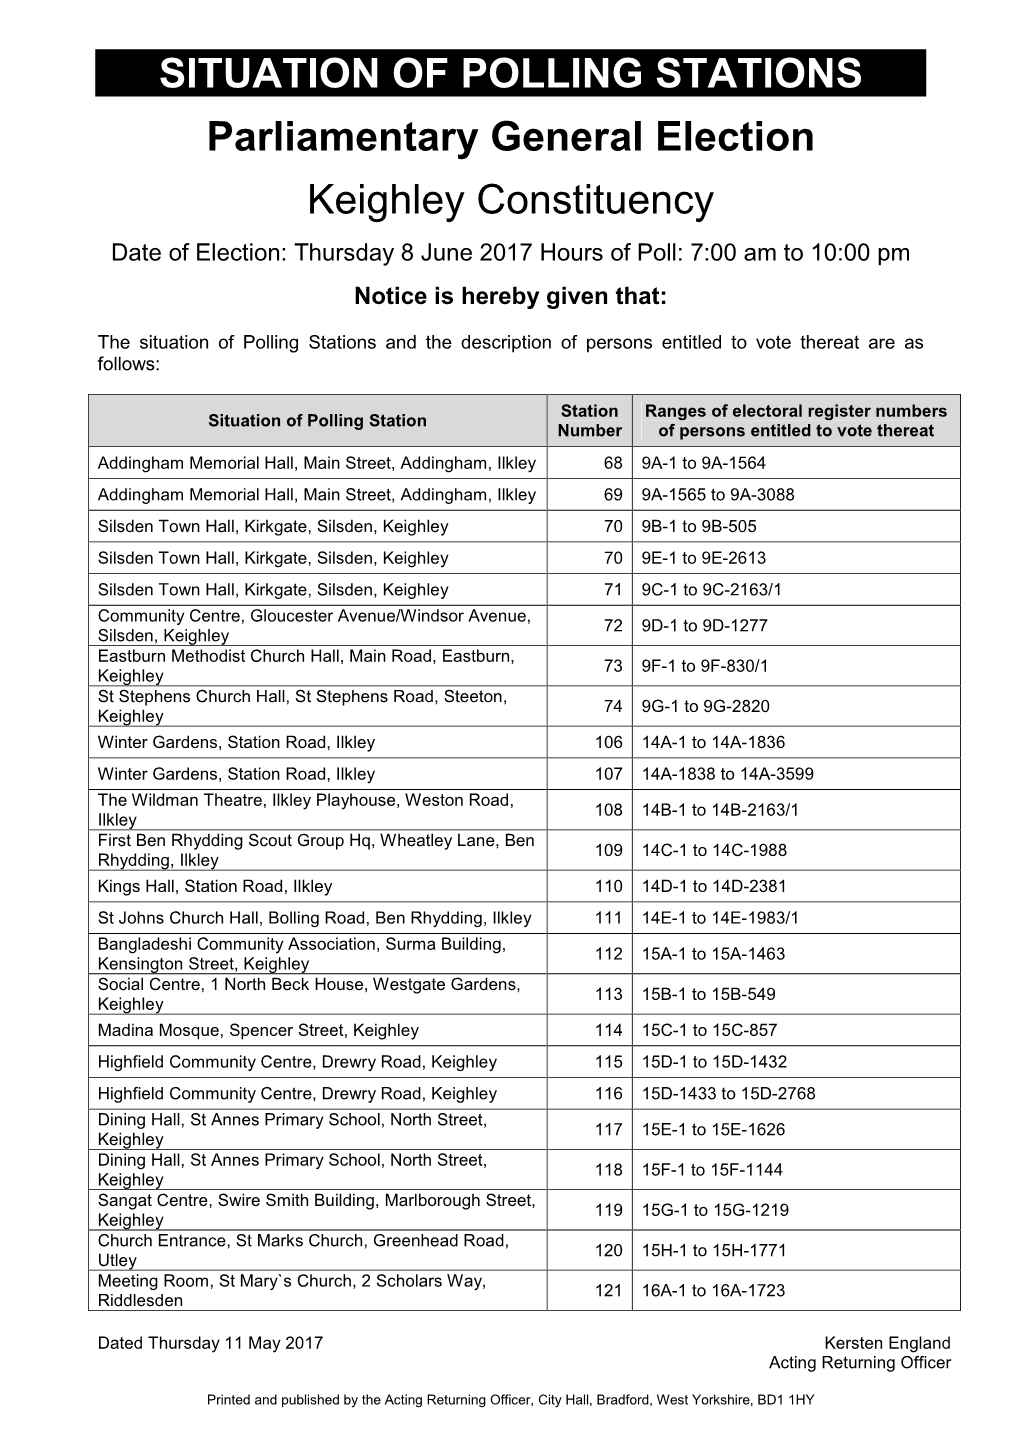 Situation of Polling Station Notice